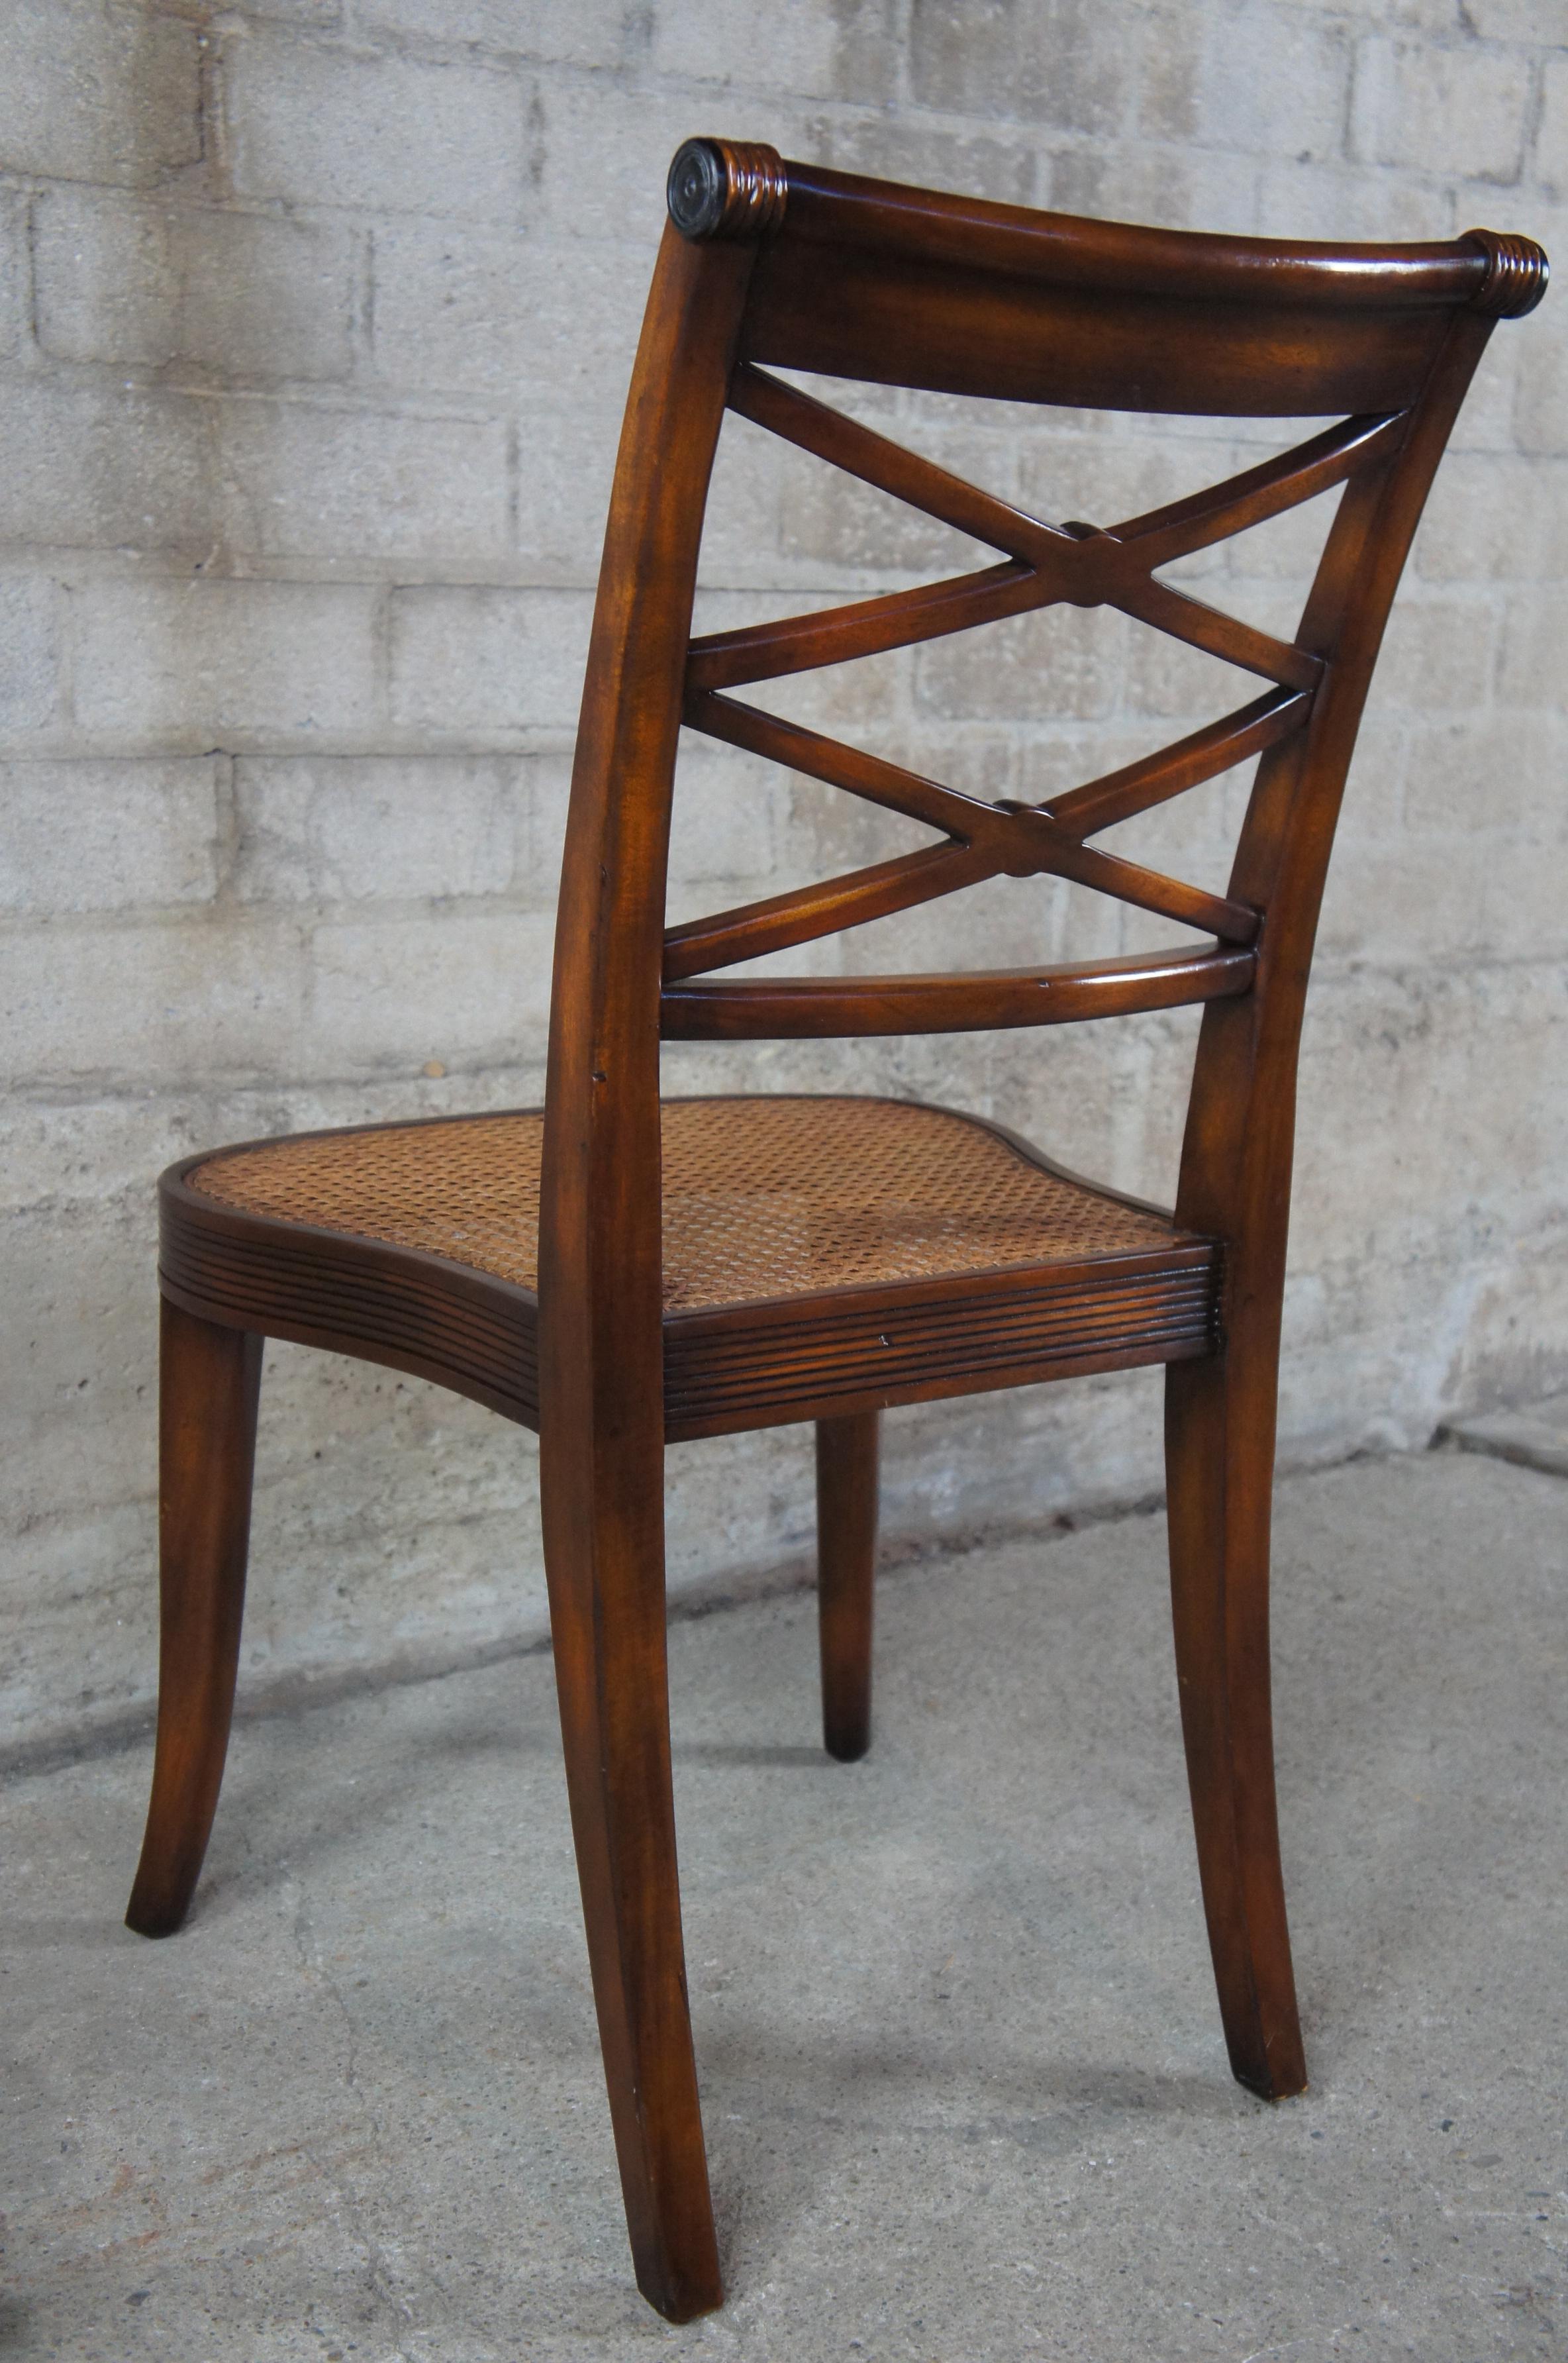 8 Theodore Alexander Flamed Mahogany X Back Caned Regency Dining Chairs 4100-902 3